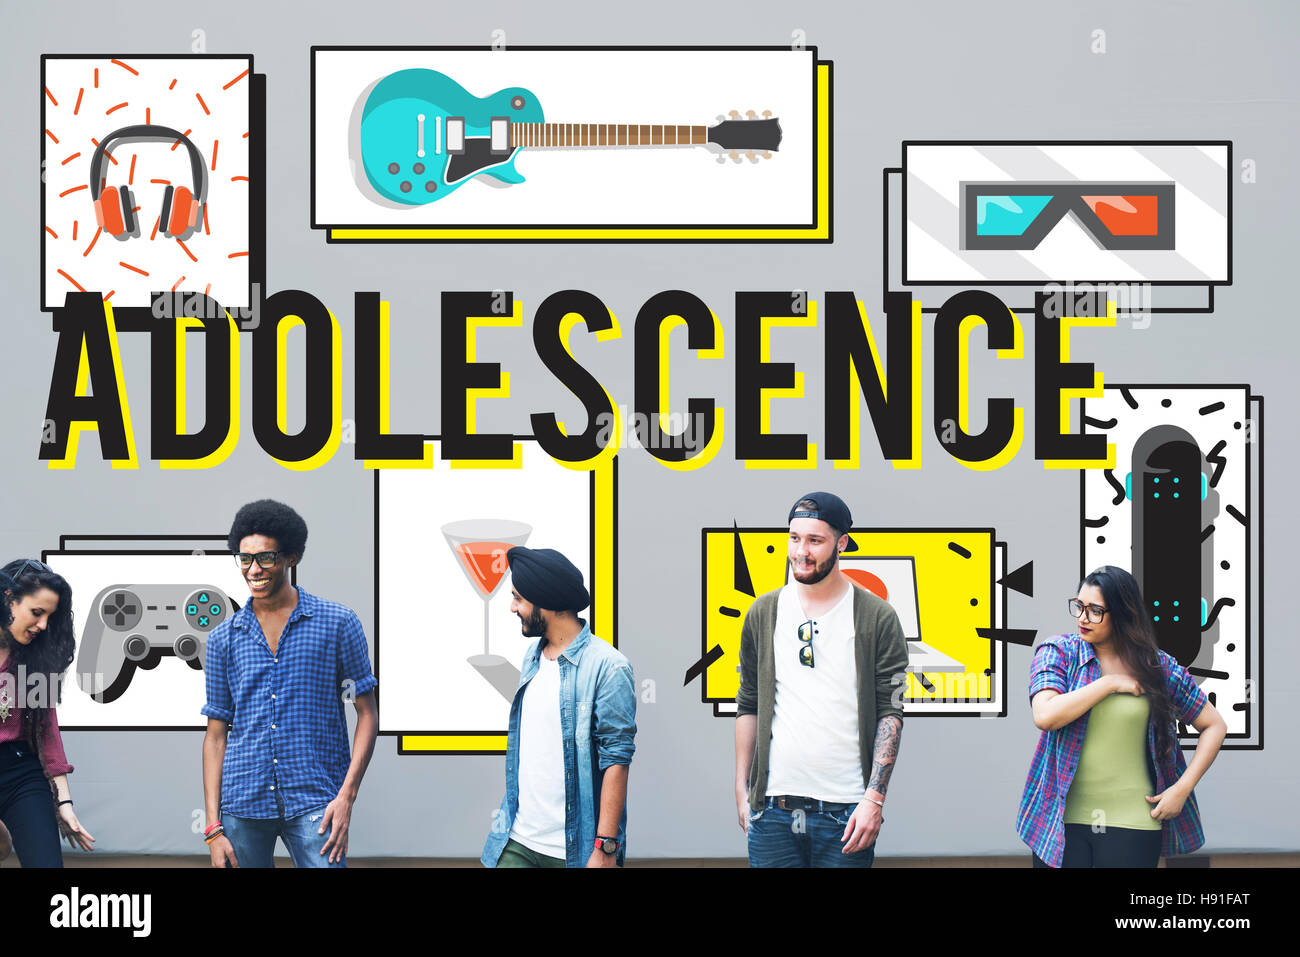 Adolescence Young Adult Youth Culture Lifestyle Concept Stock Photo